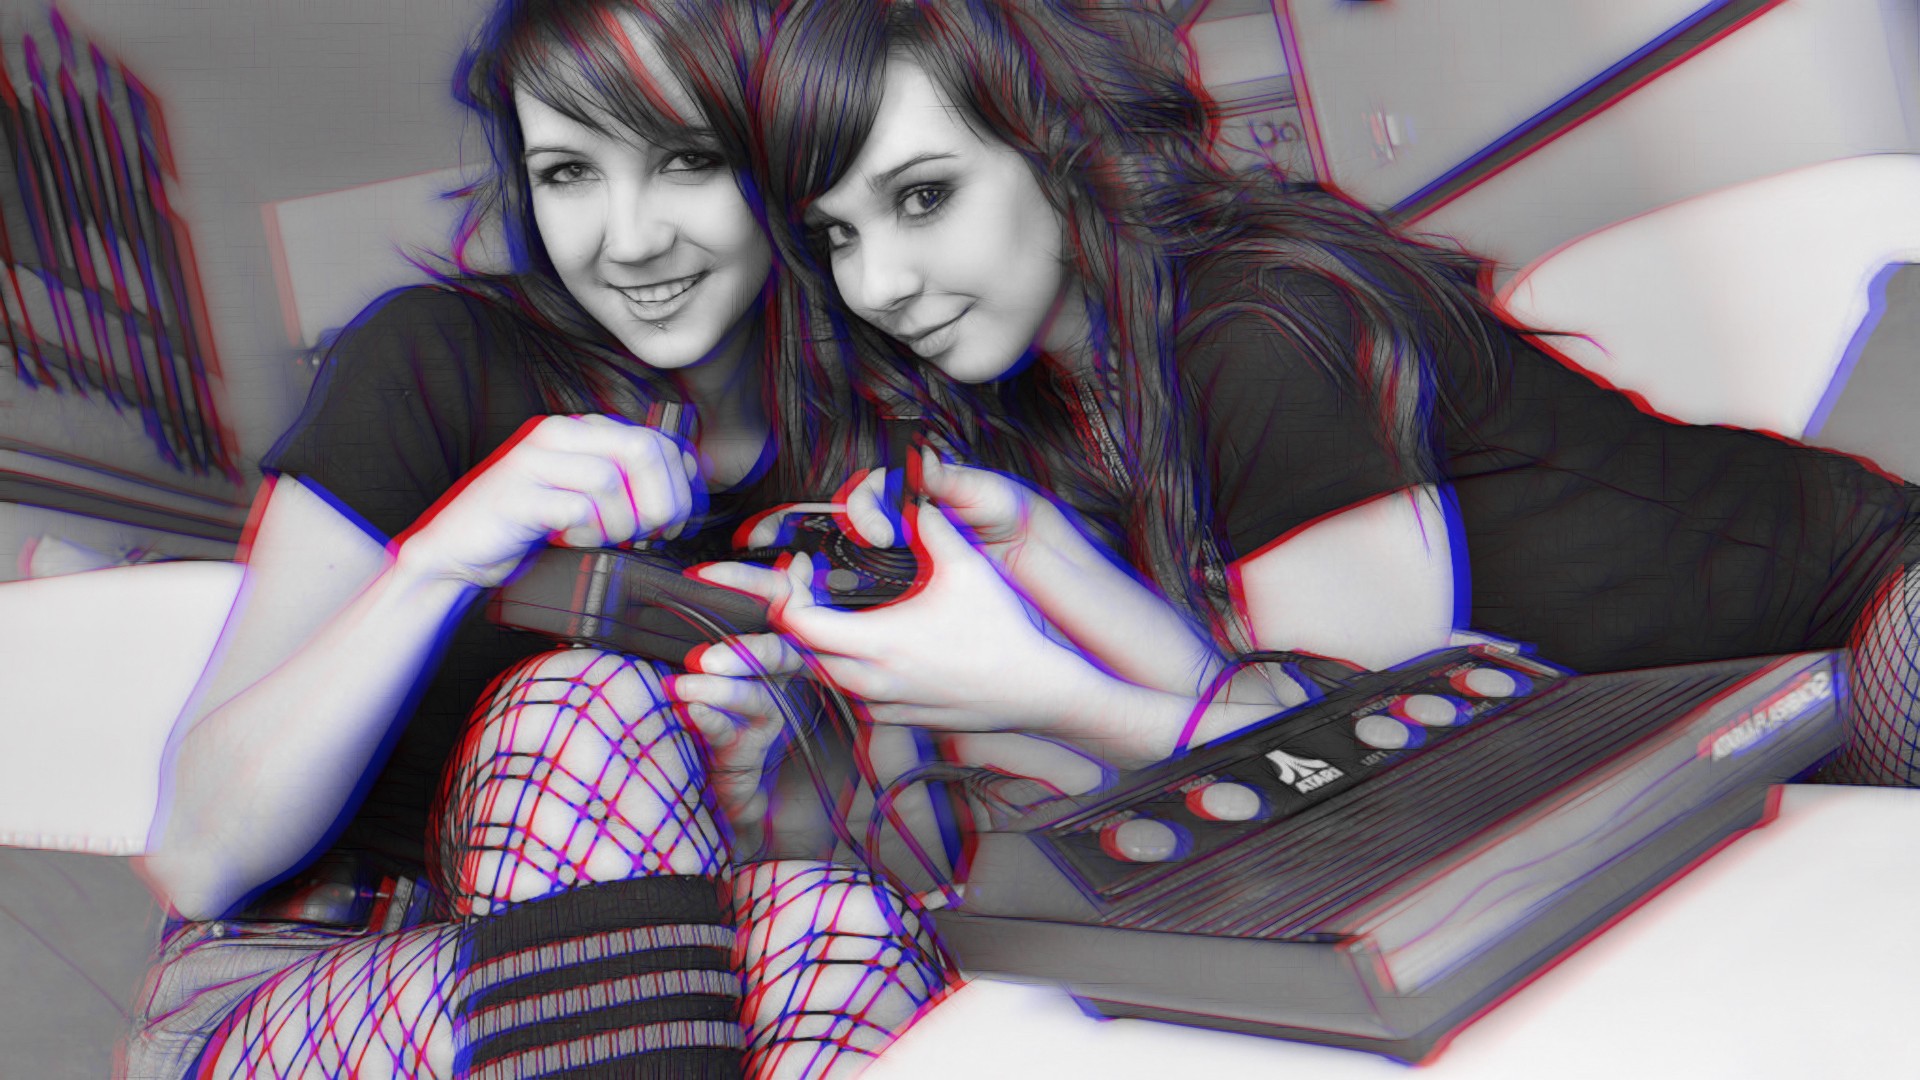 People 1920x1080 anaglyph 3D Atari Ariel Rebel pornstar consoles women women indoors retro console looking at viewer indoors long hair smiling technology Canadian women two women